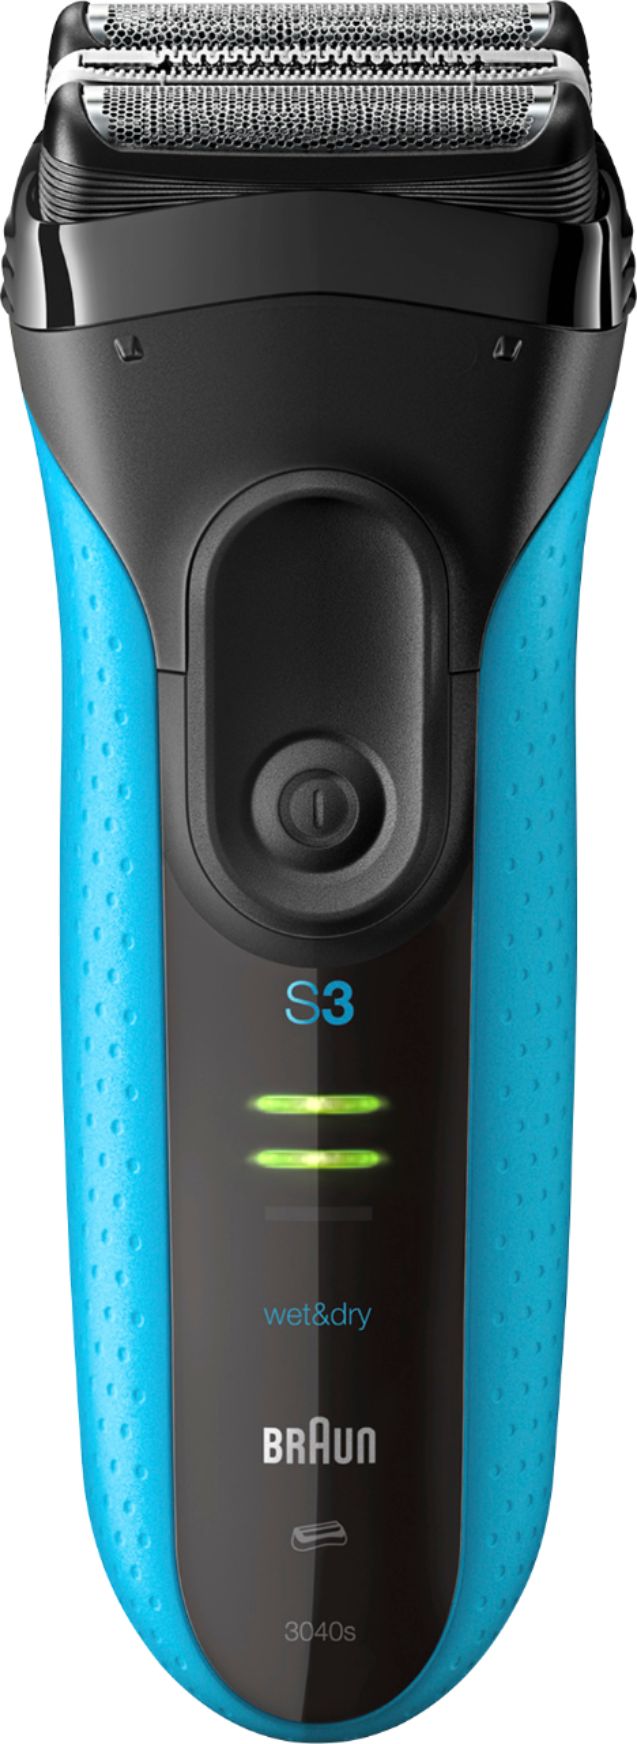 Braun Series 3 3040s Wet and Dry Electric Shaver